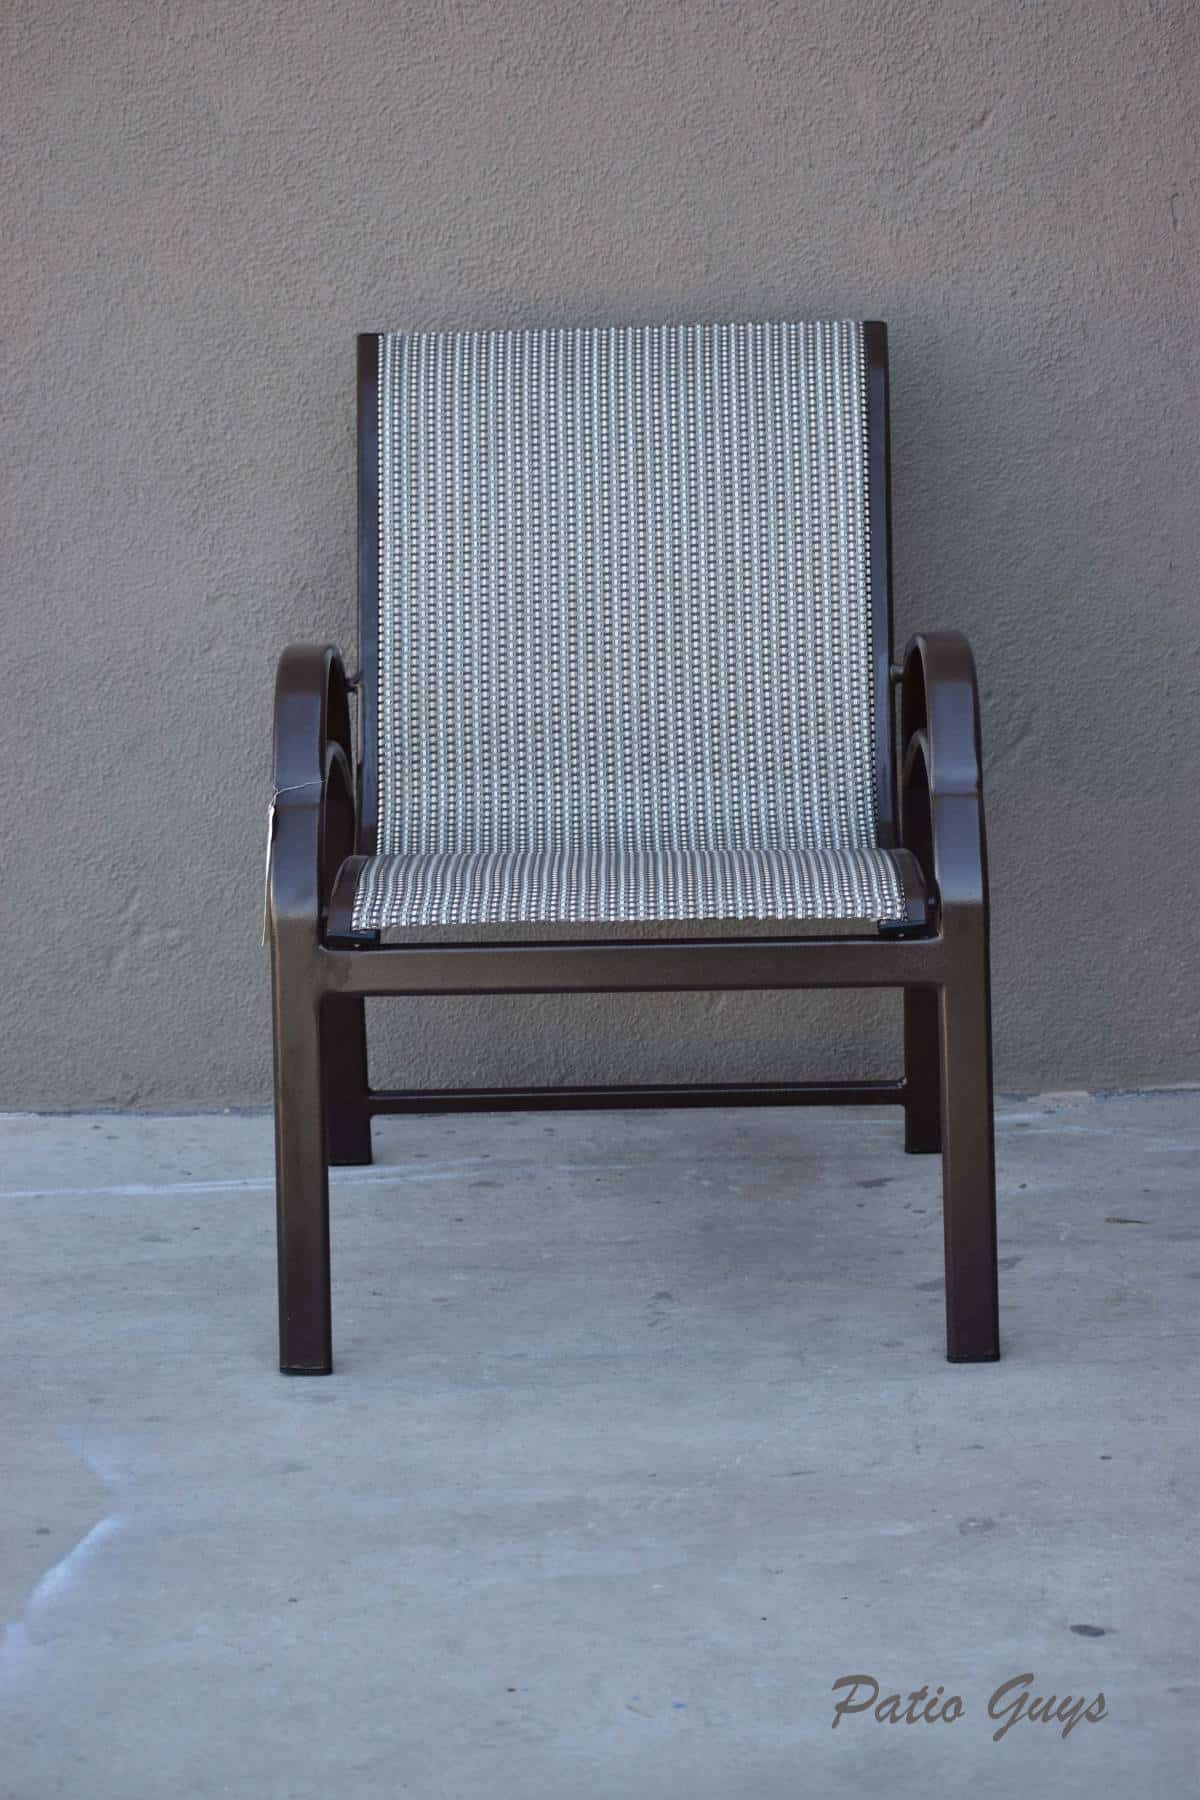 Java and Plata Sling Chair